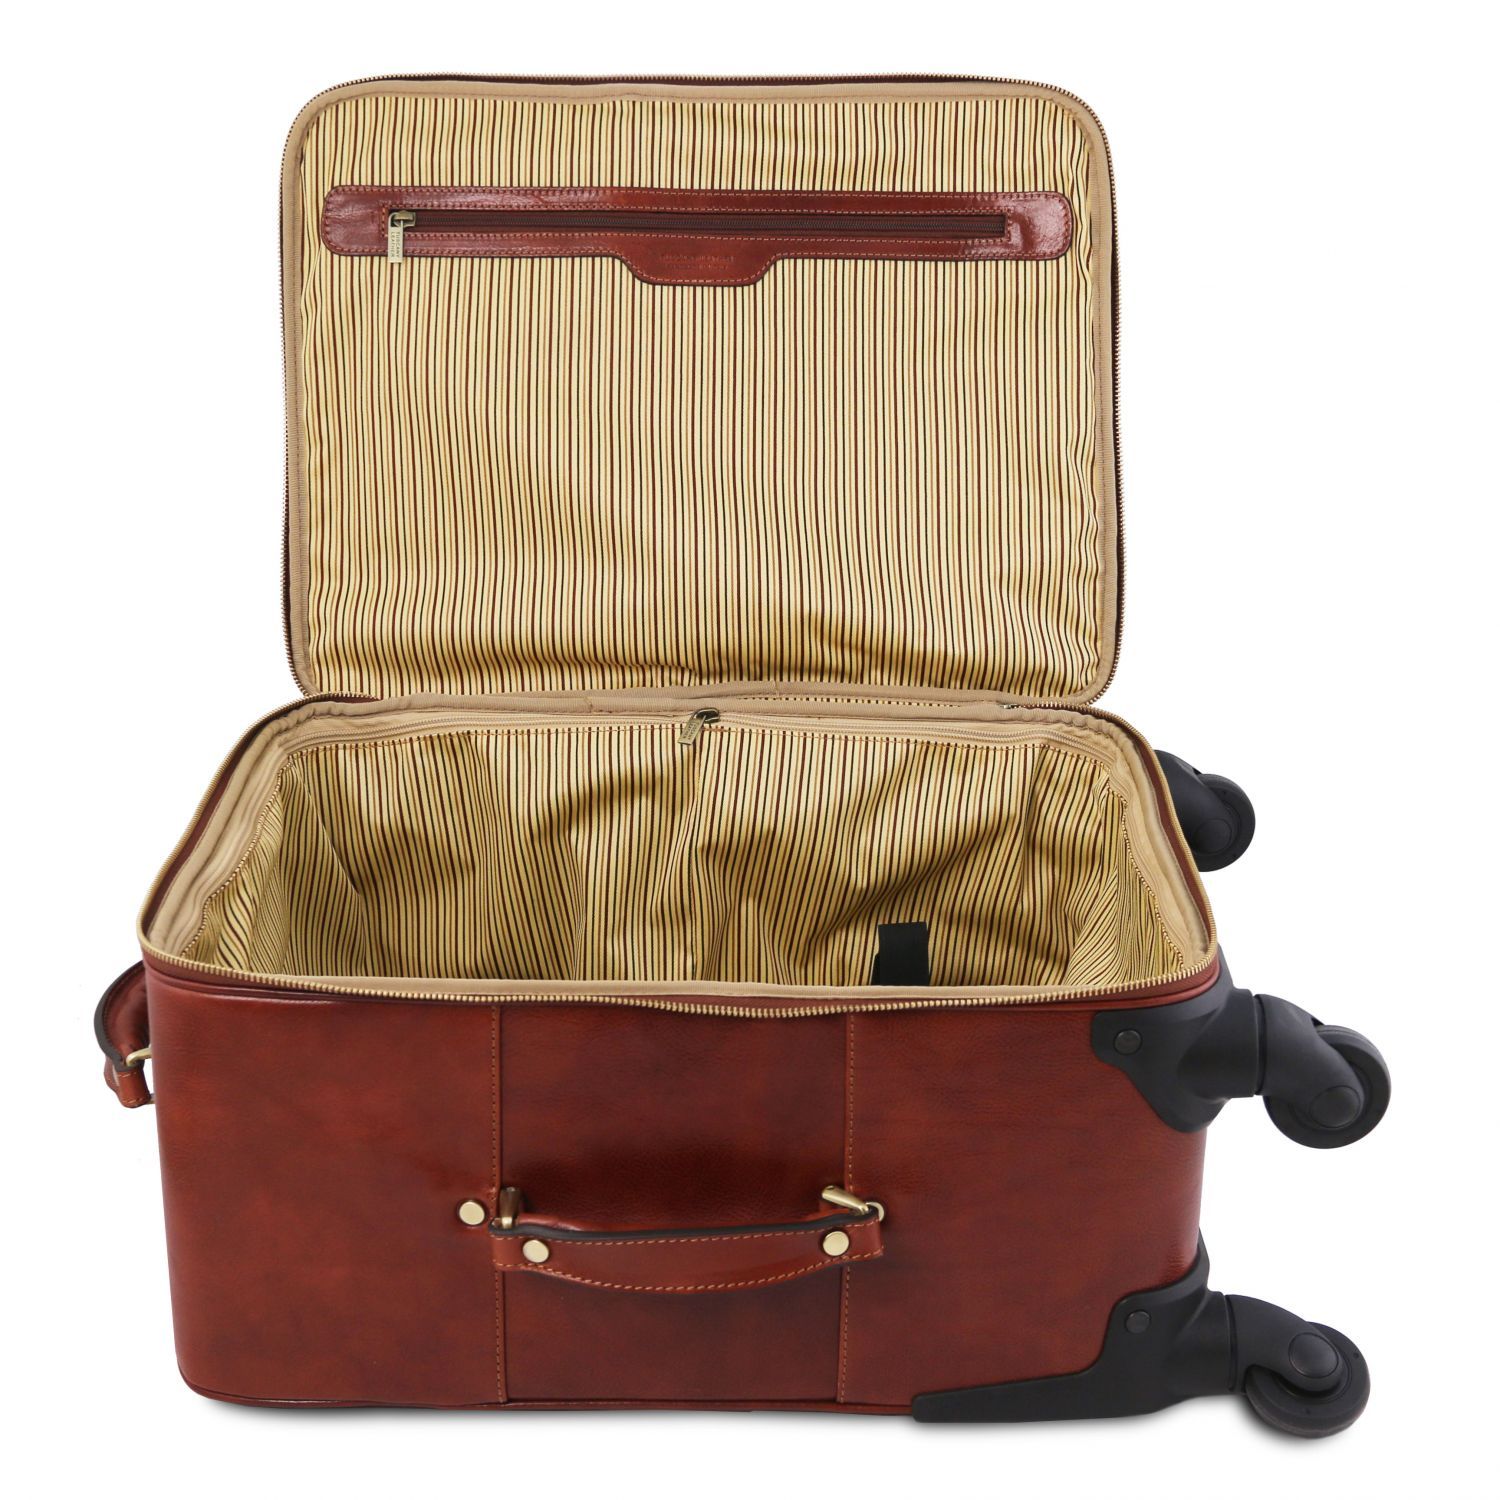 Buy brand new Woodland travel luggage leather bag with wheels in